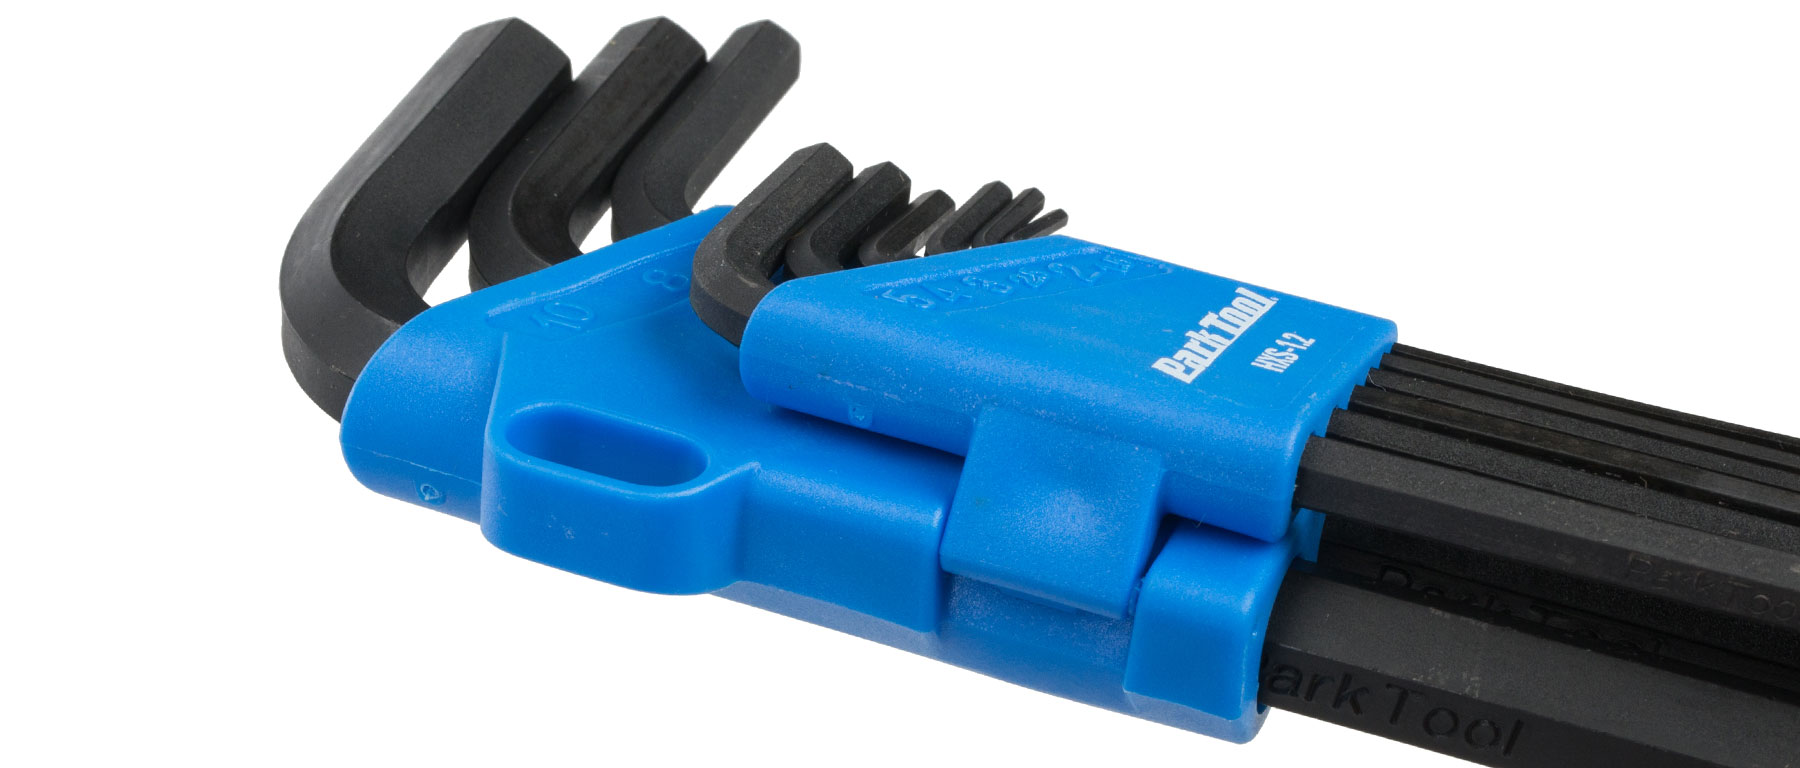 Park Tool HXS-1.2 Hex Wrench Set